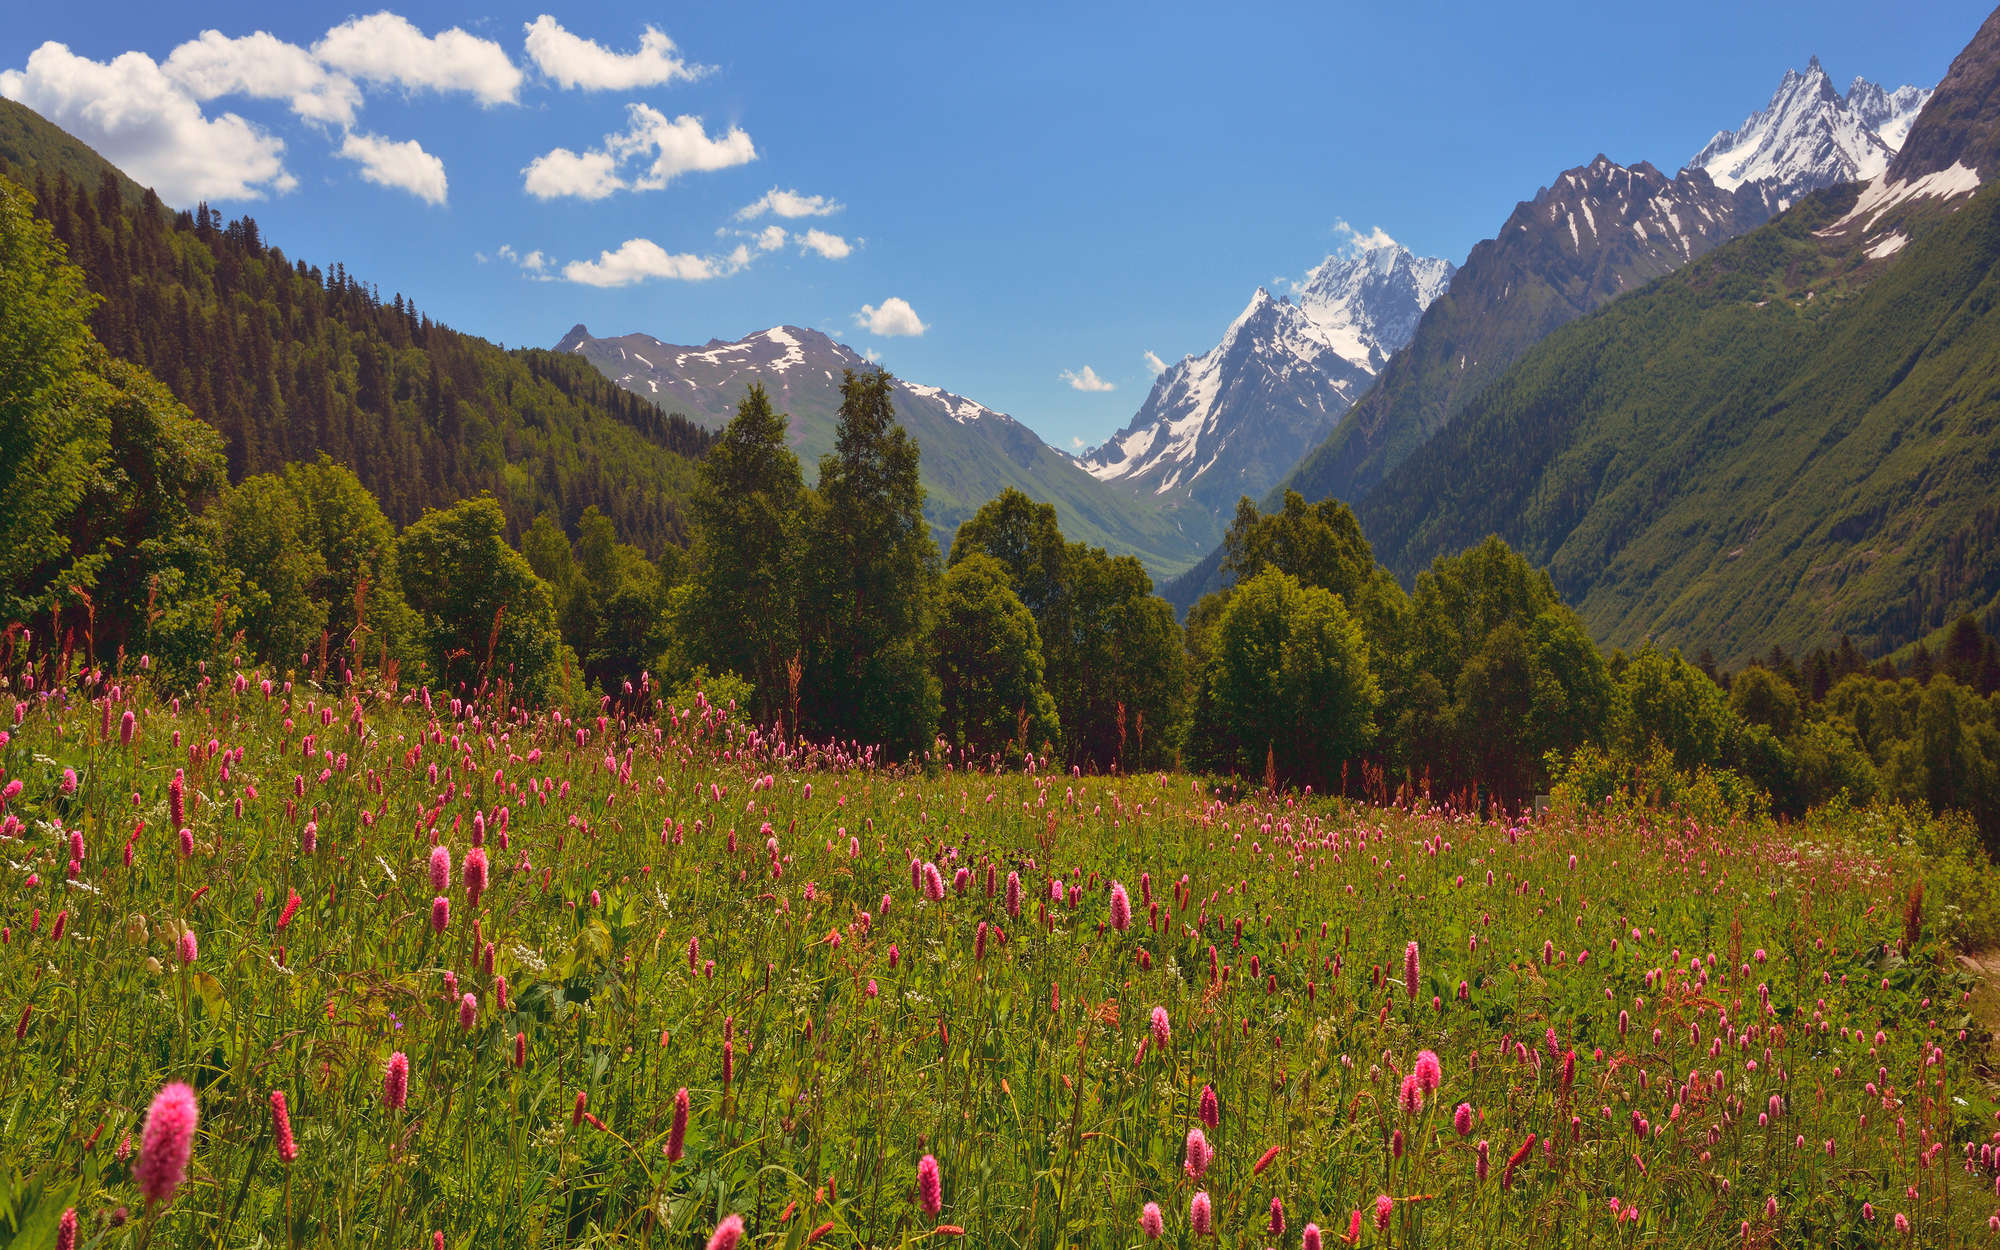             Nature Wallpaper Meadow and Mountain Landscape - Premium Smooth Non-woven
        